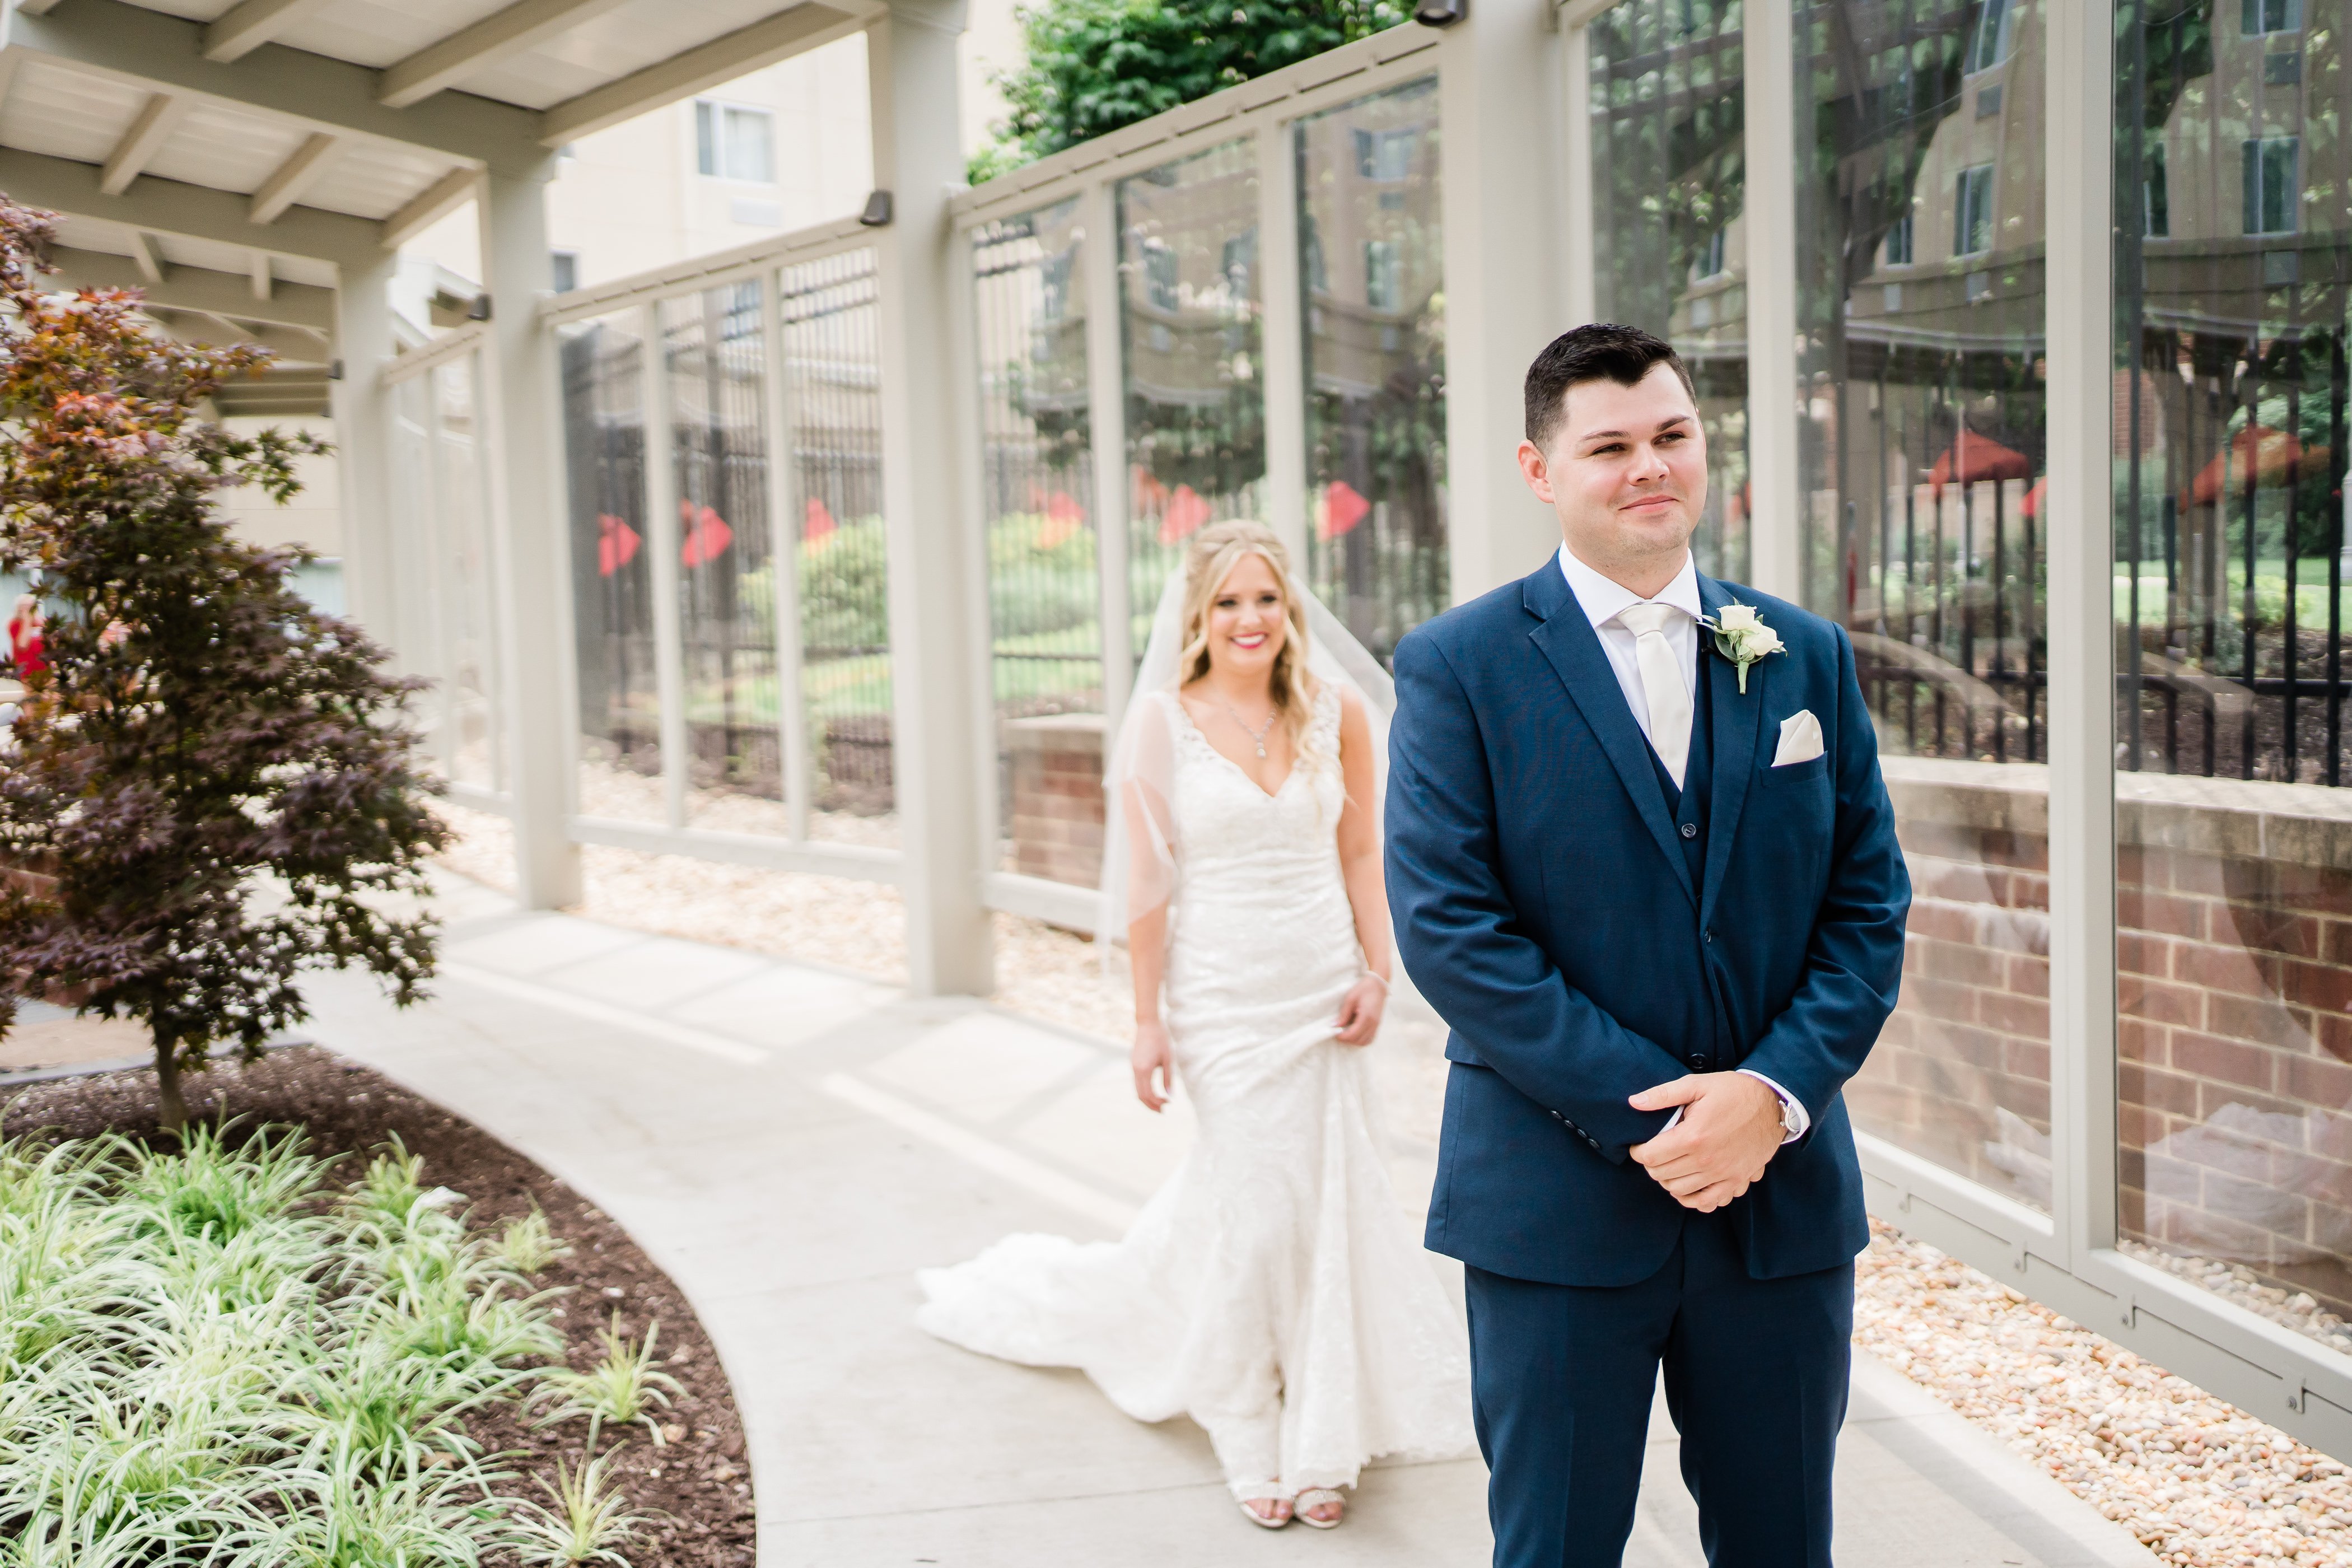 Fort Wayne wedding photographers capture bride walking up to her groom from behind him for their first look